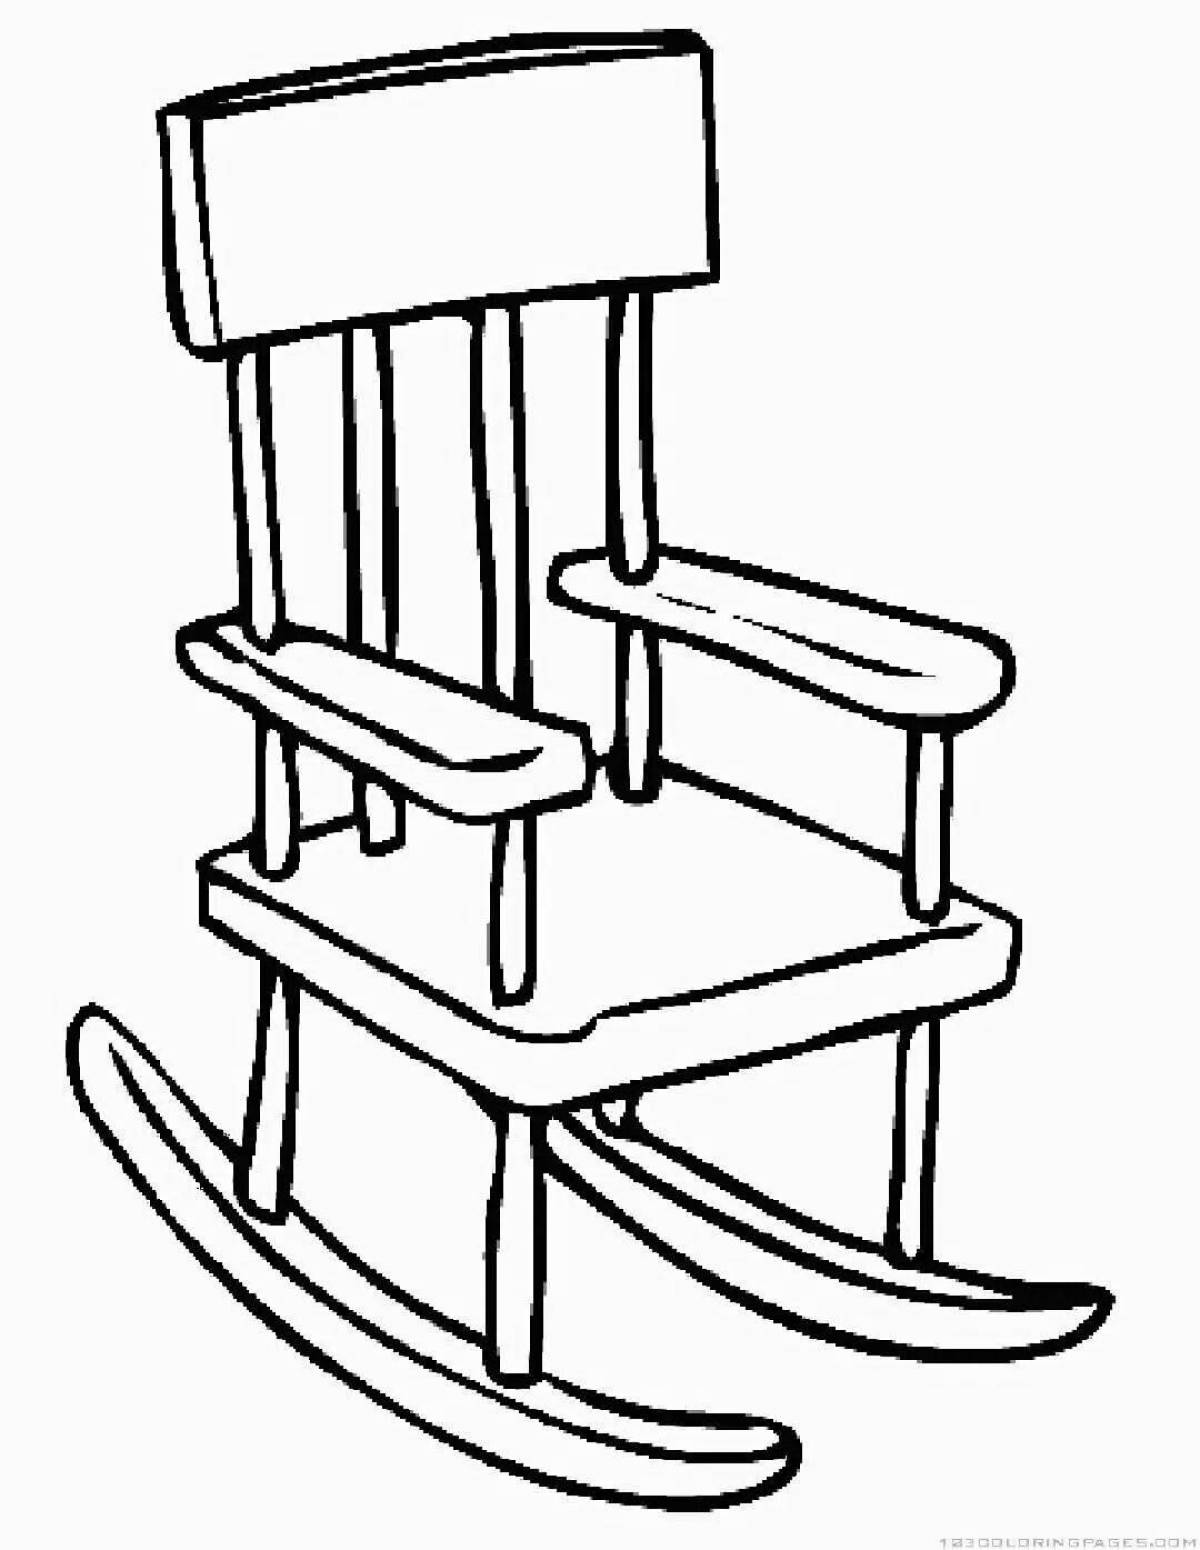 Coloring book of a cheerful high chair